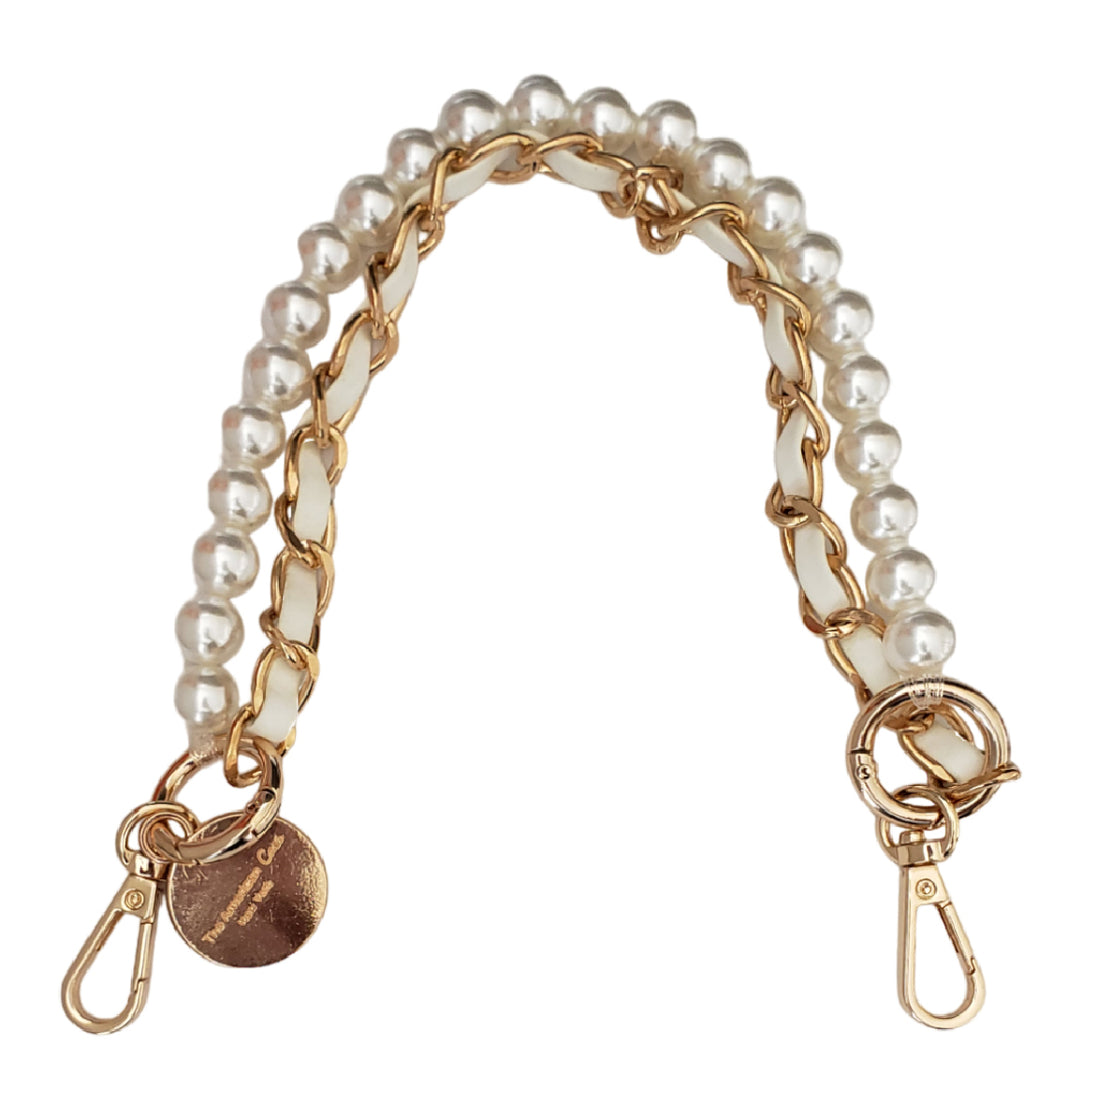 Audrey - Pearl and Leather Metal Link Bracelet Chain with Gold Carabiners